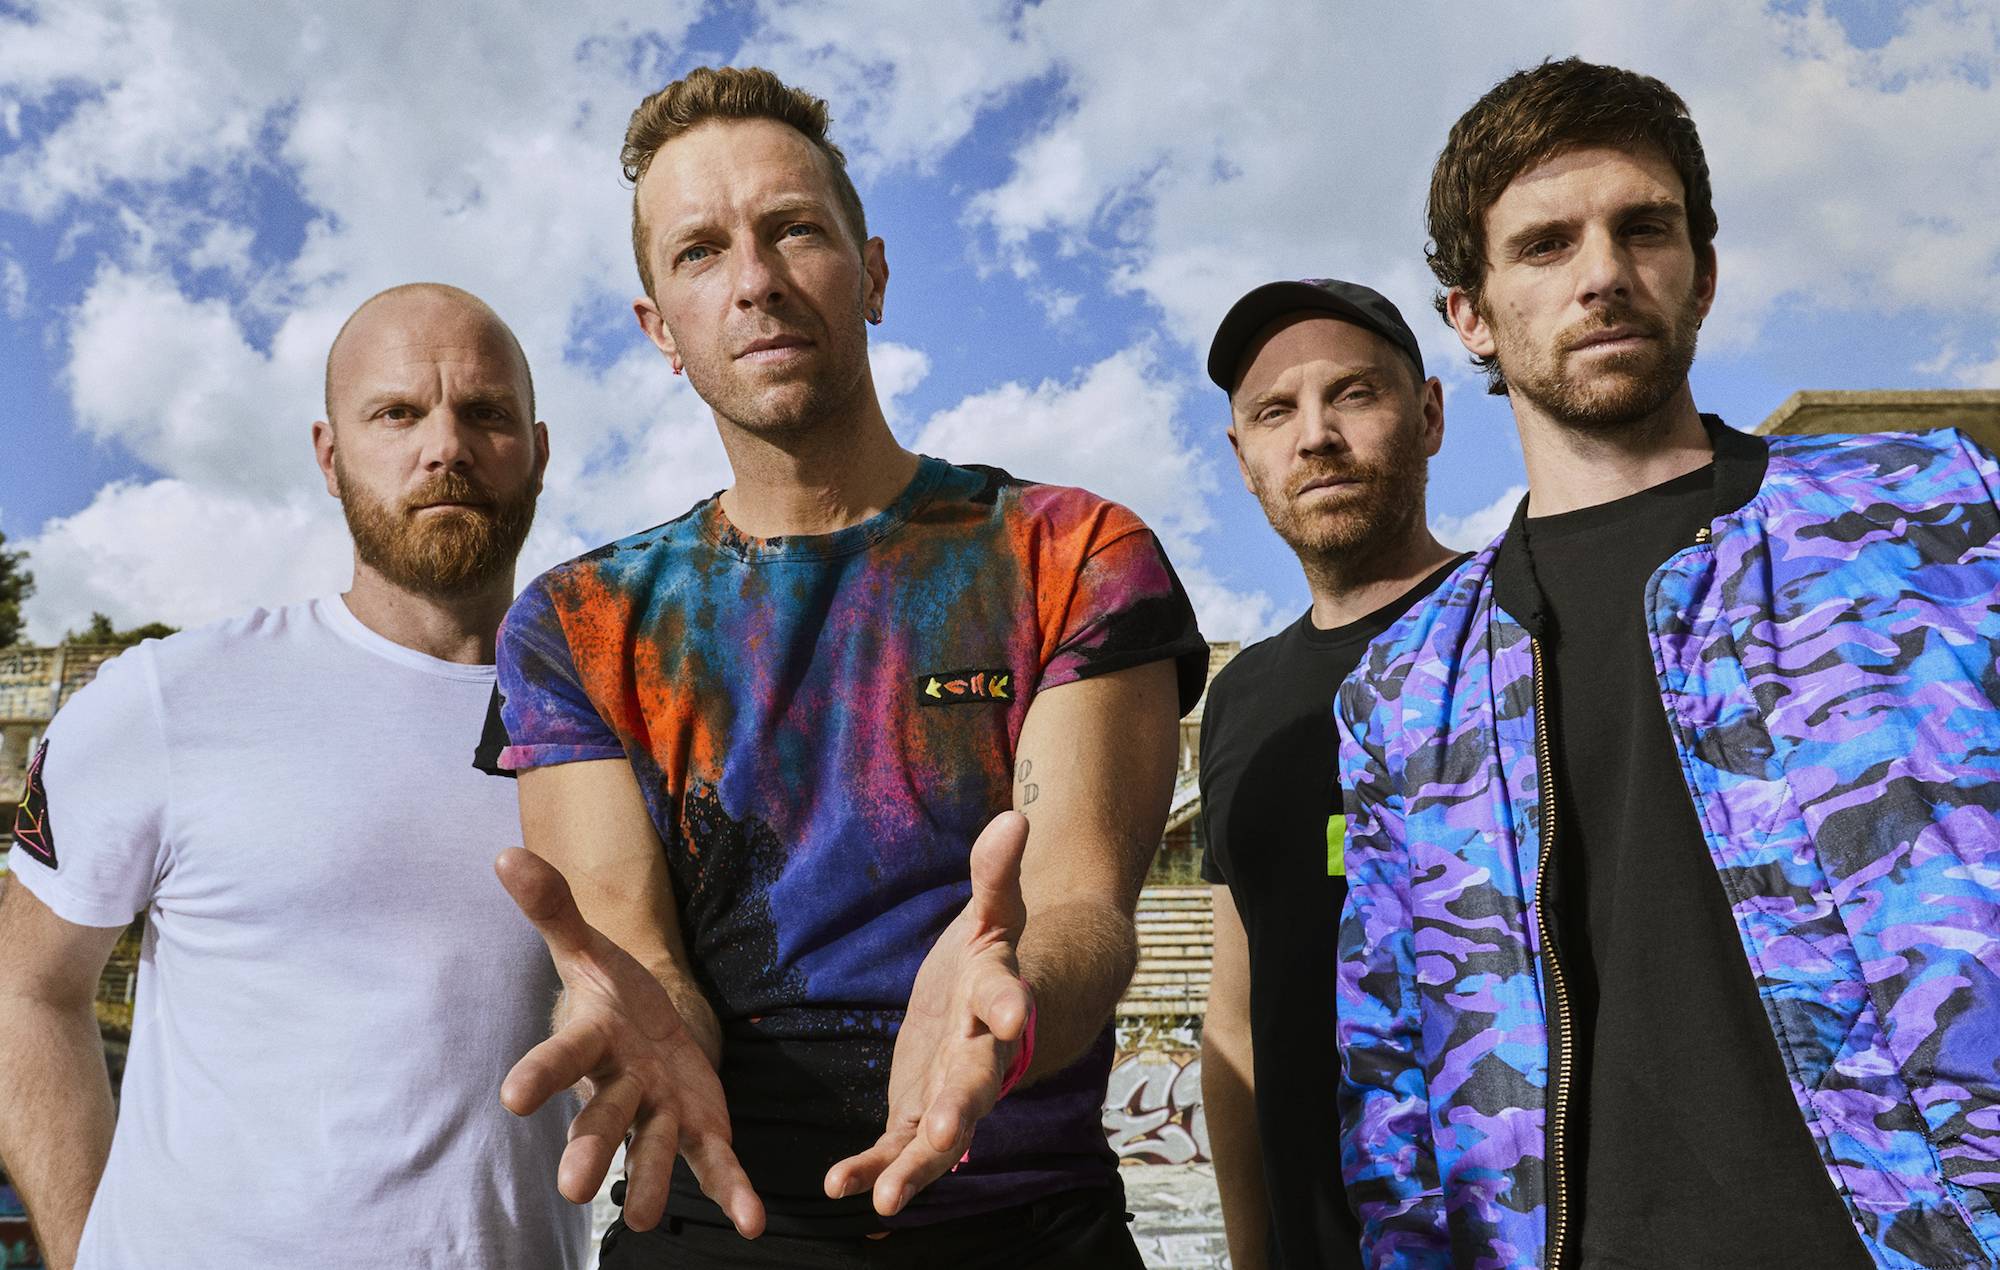 NME Radio Roundup 25 October 2021: Coldplay, Pa Salieu, Snail Mail and more